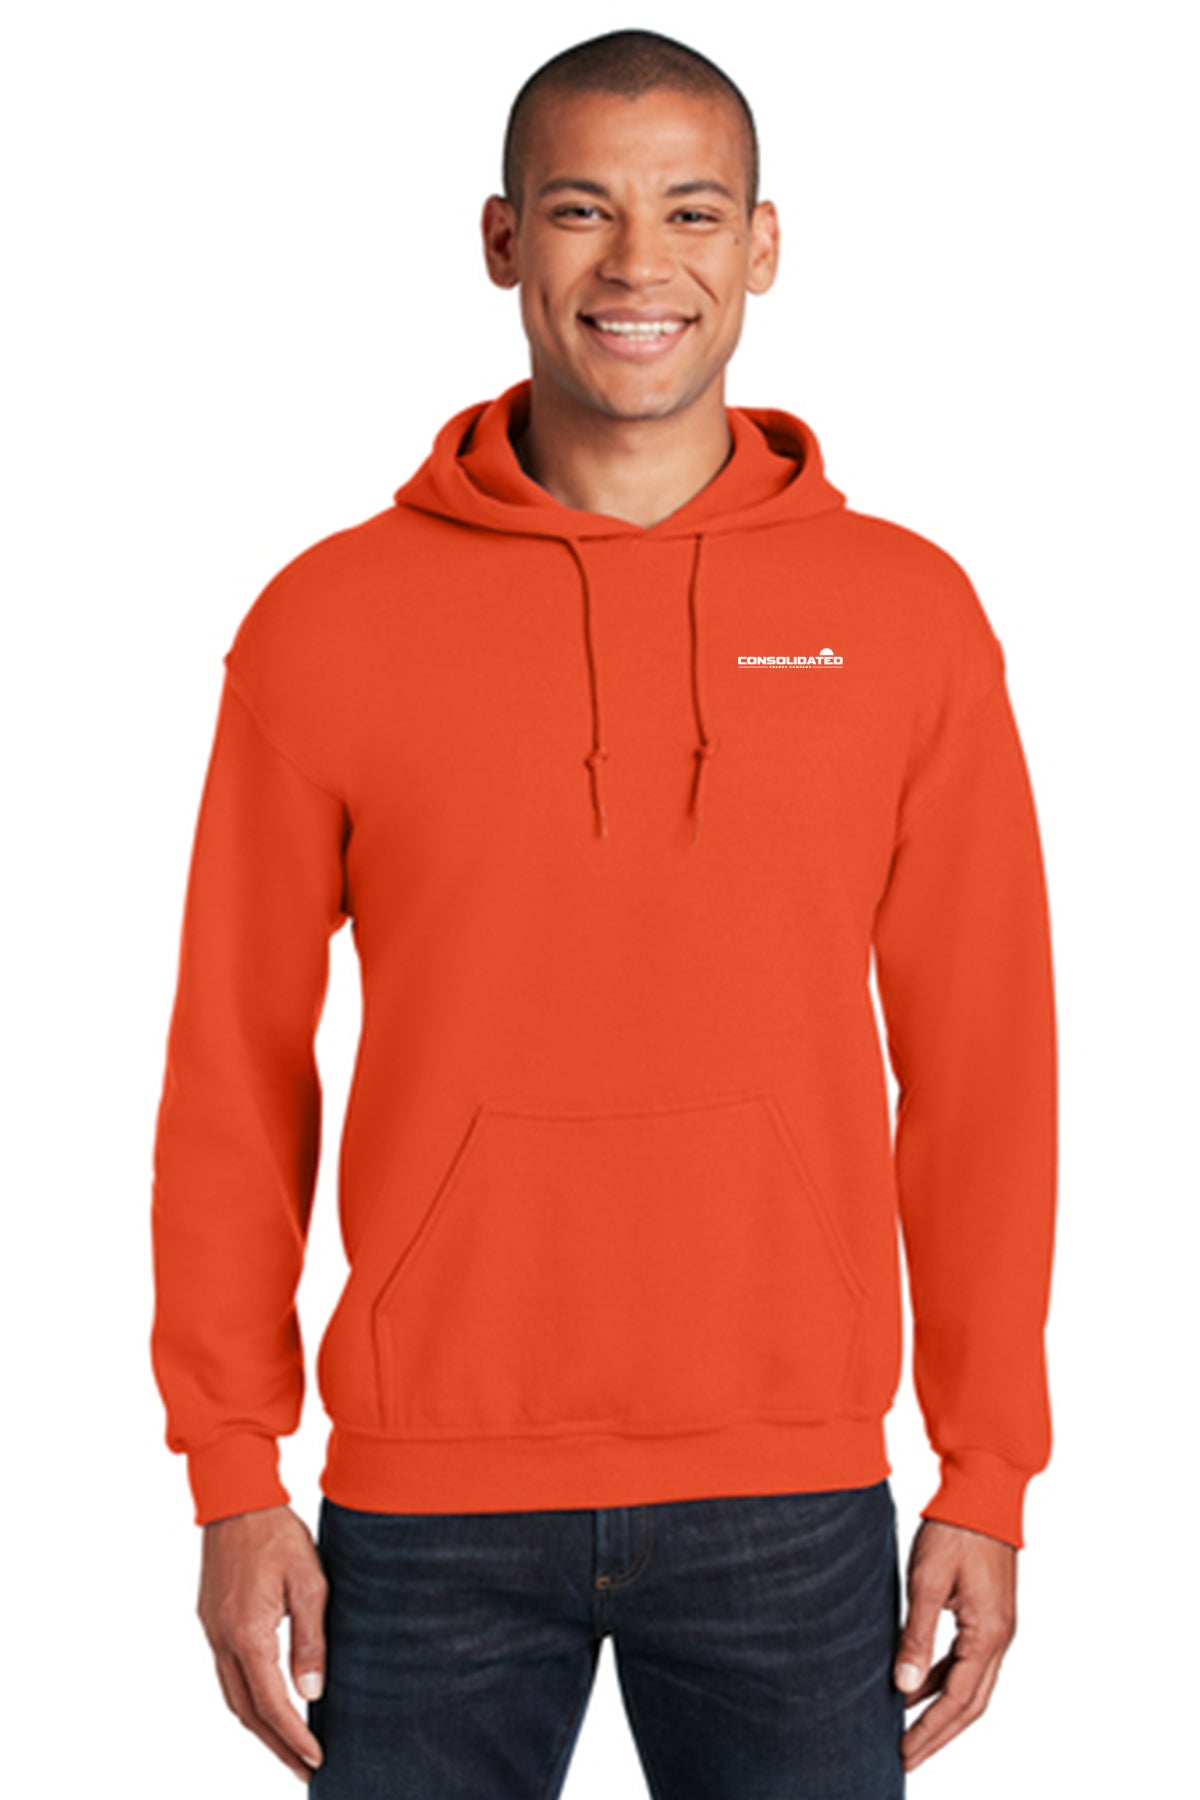 Consolidated Energy Company Hoodie